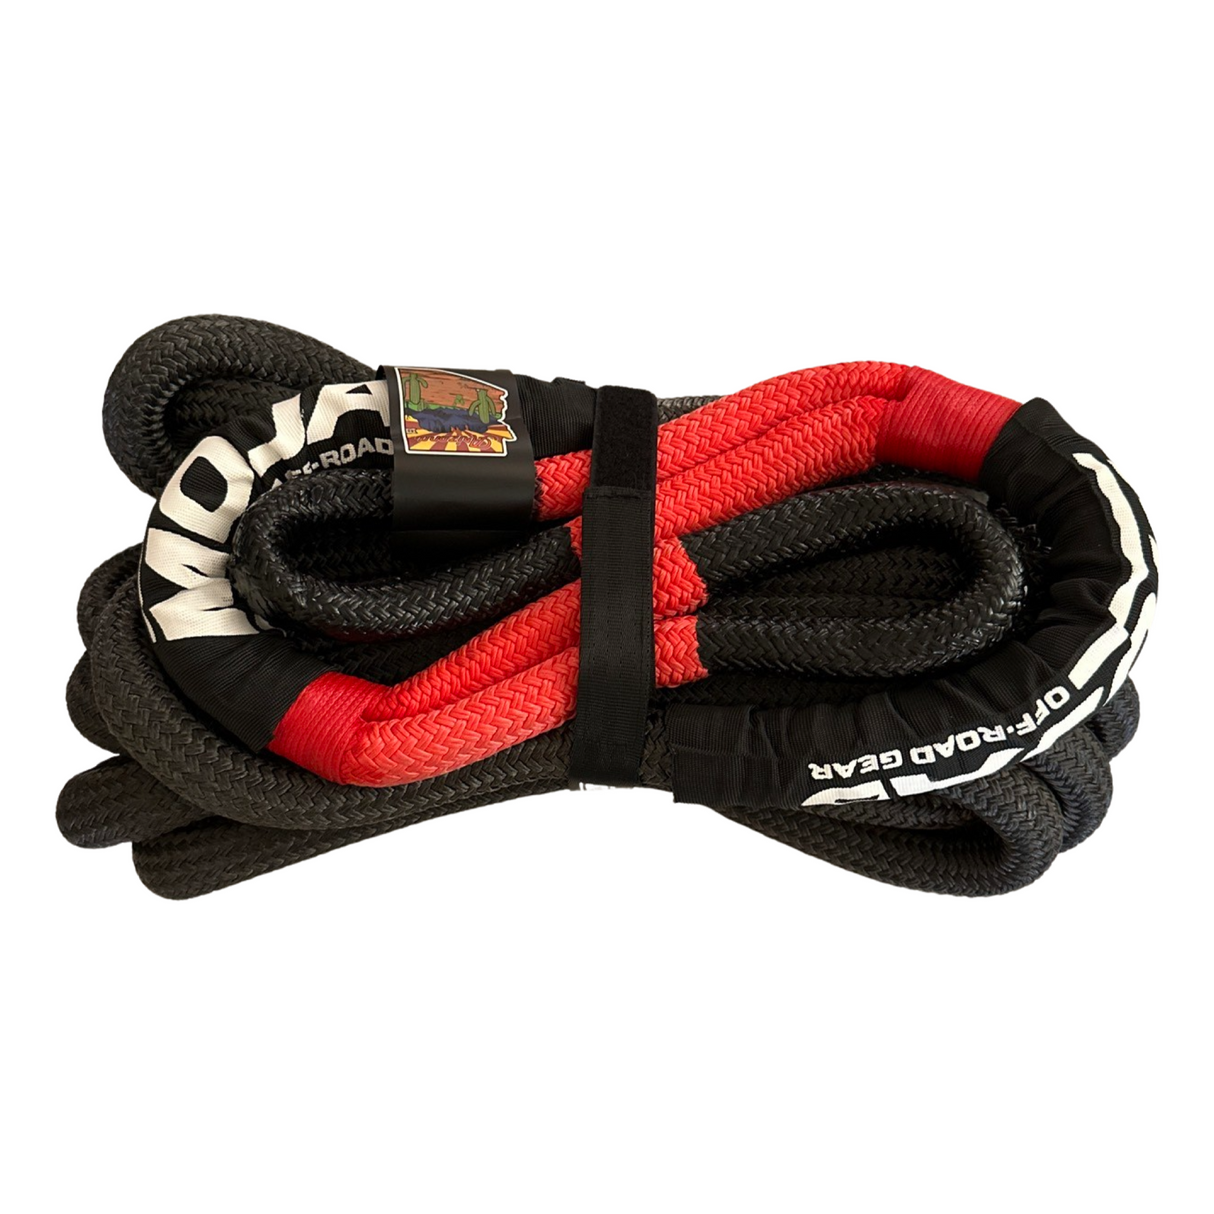 7/8'' x 30' Kinetic rope with storage bag.